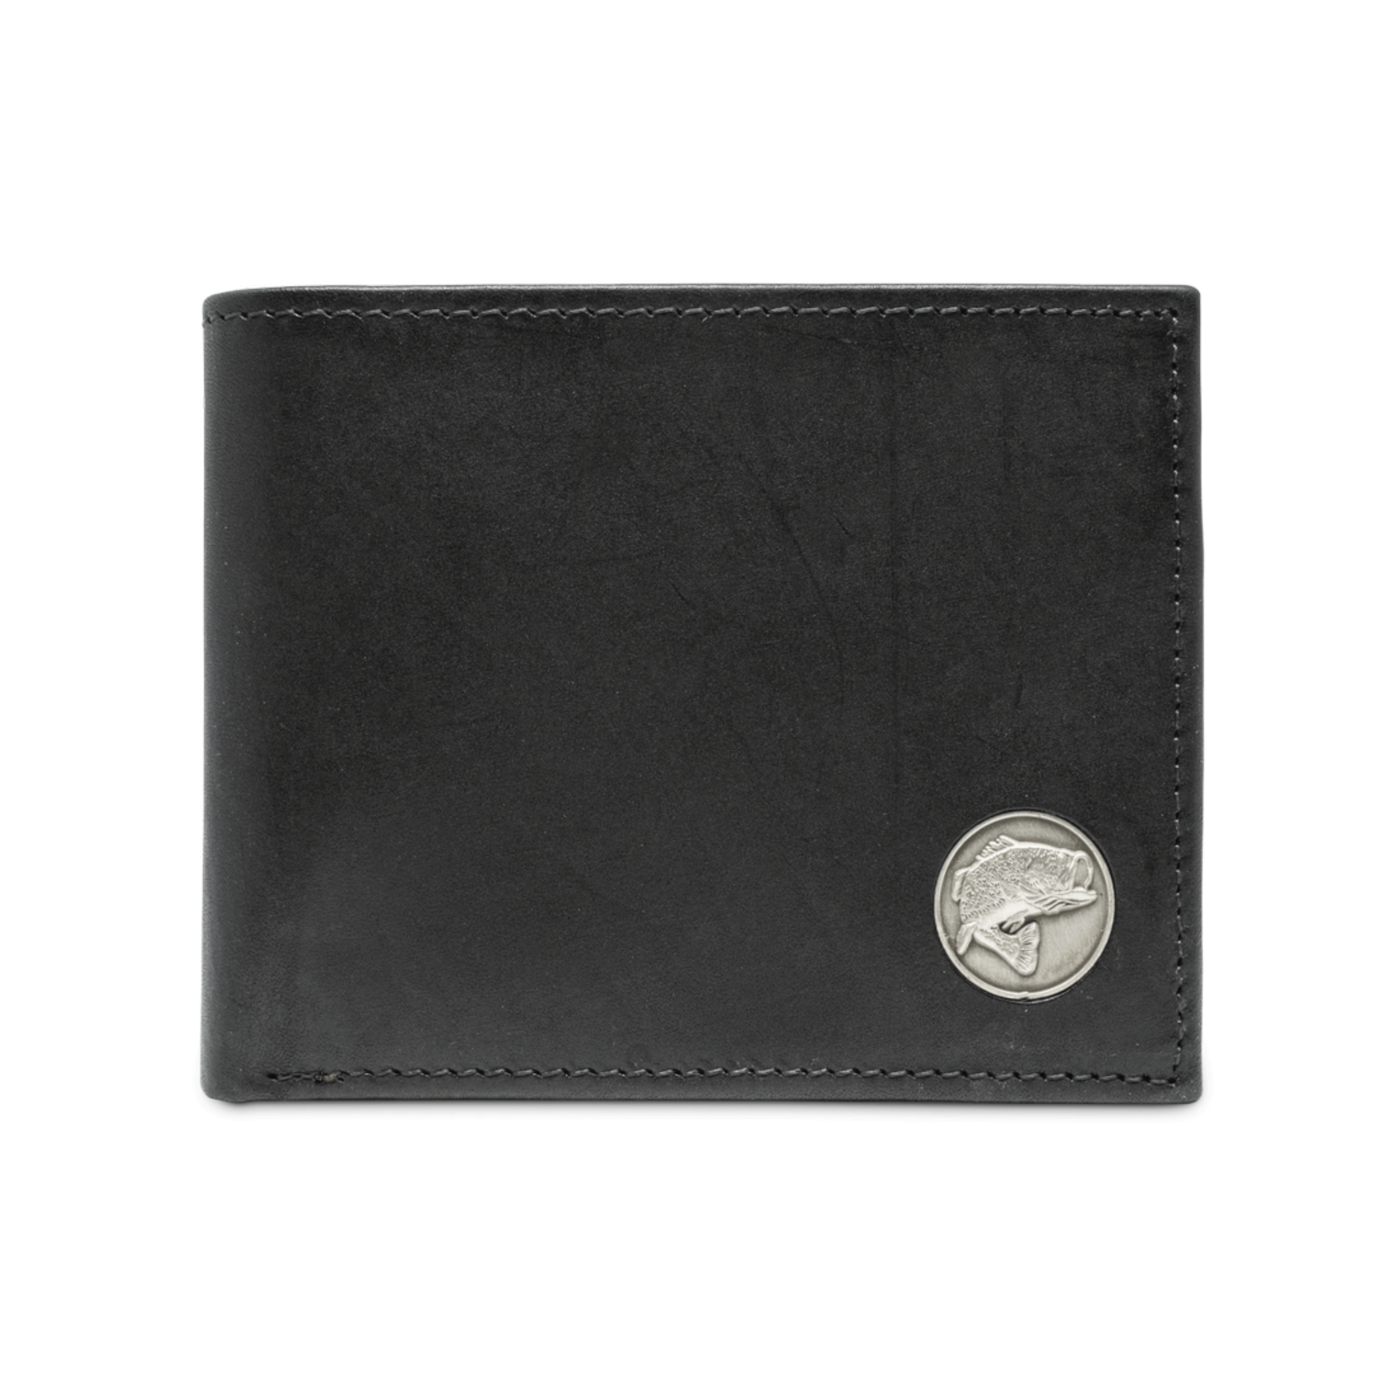 The perfect piece for the avid fisher, you will find the Dynasty Bifold Bass Wallet provides premier full grain leather, an embossed bass concho, and a hand-oiled finish that covers every person's needs in a wallet. Double-Sided Interior Clear View ID Holder 13 Storage Pockets Full-Length Dollar-Sized Pocket Sleek Thin Design To Fit Any Pocket Dimensions: 4.37"L x 3.37"L RFID Protection Color: Black